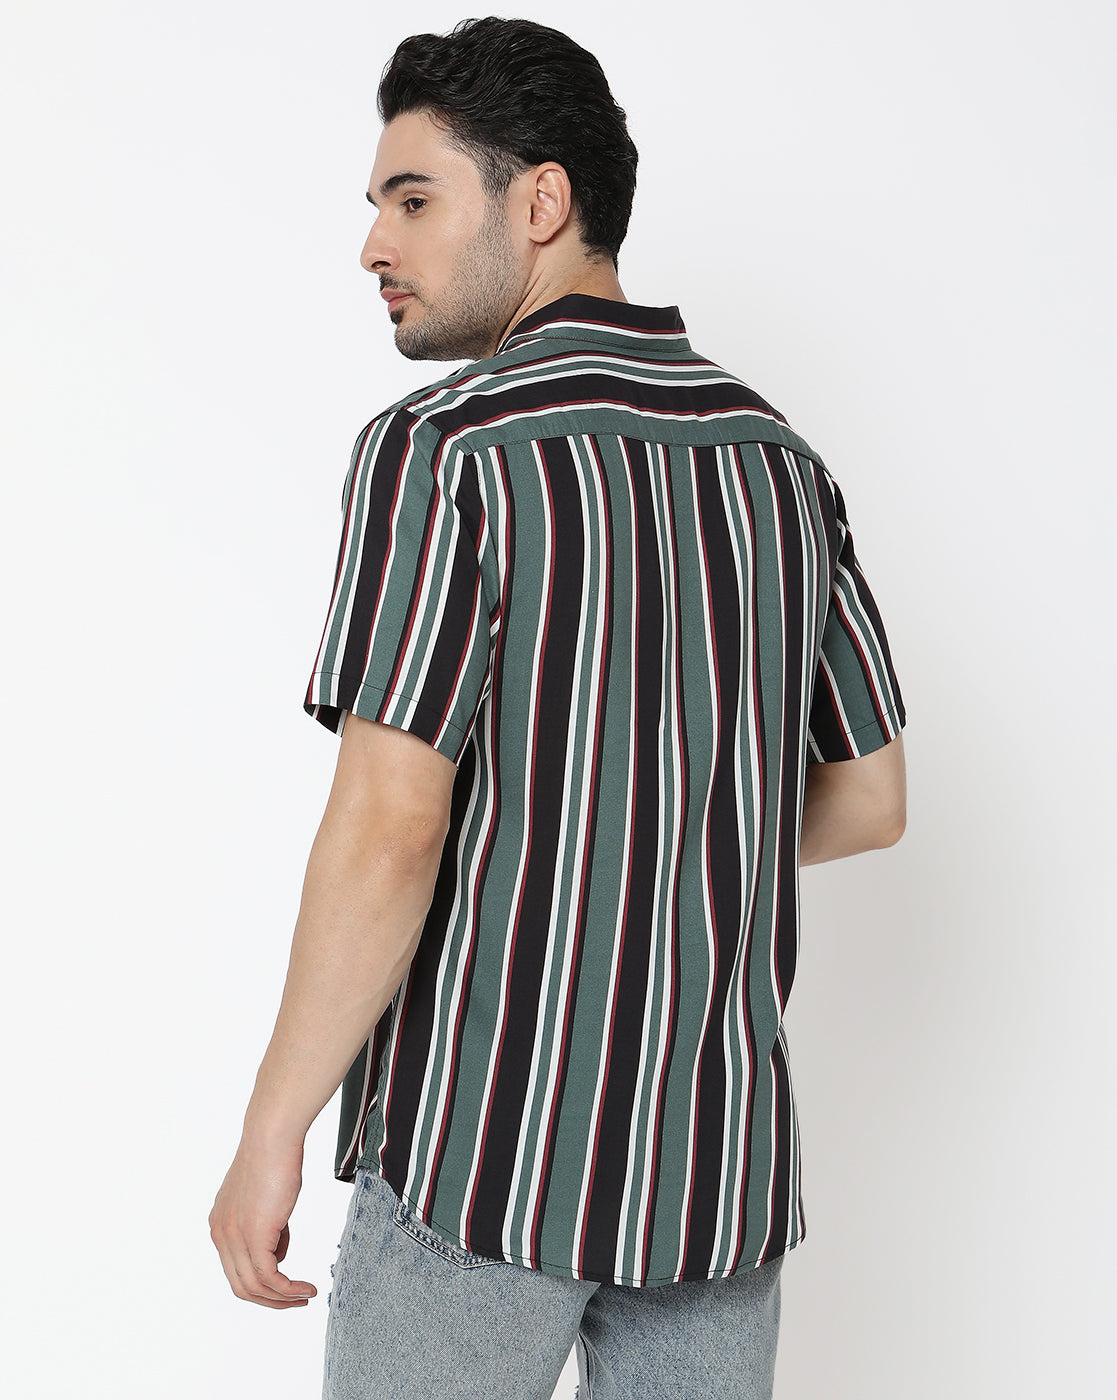 Army Green and Black Thick and Thin Striped Half Sleeve Rayon Shirt